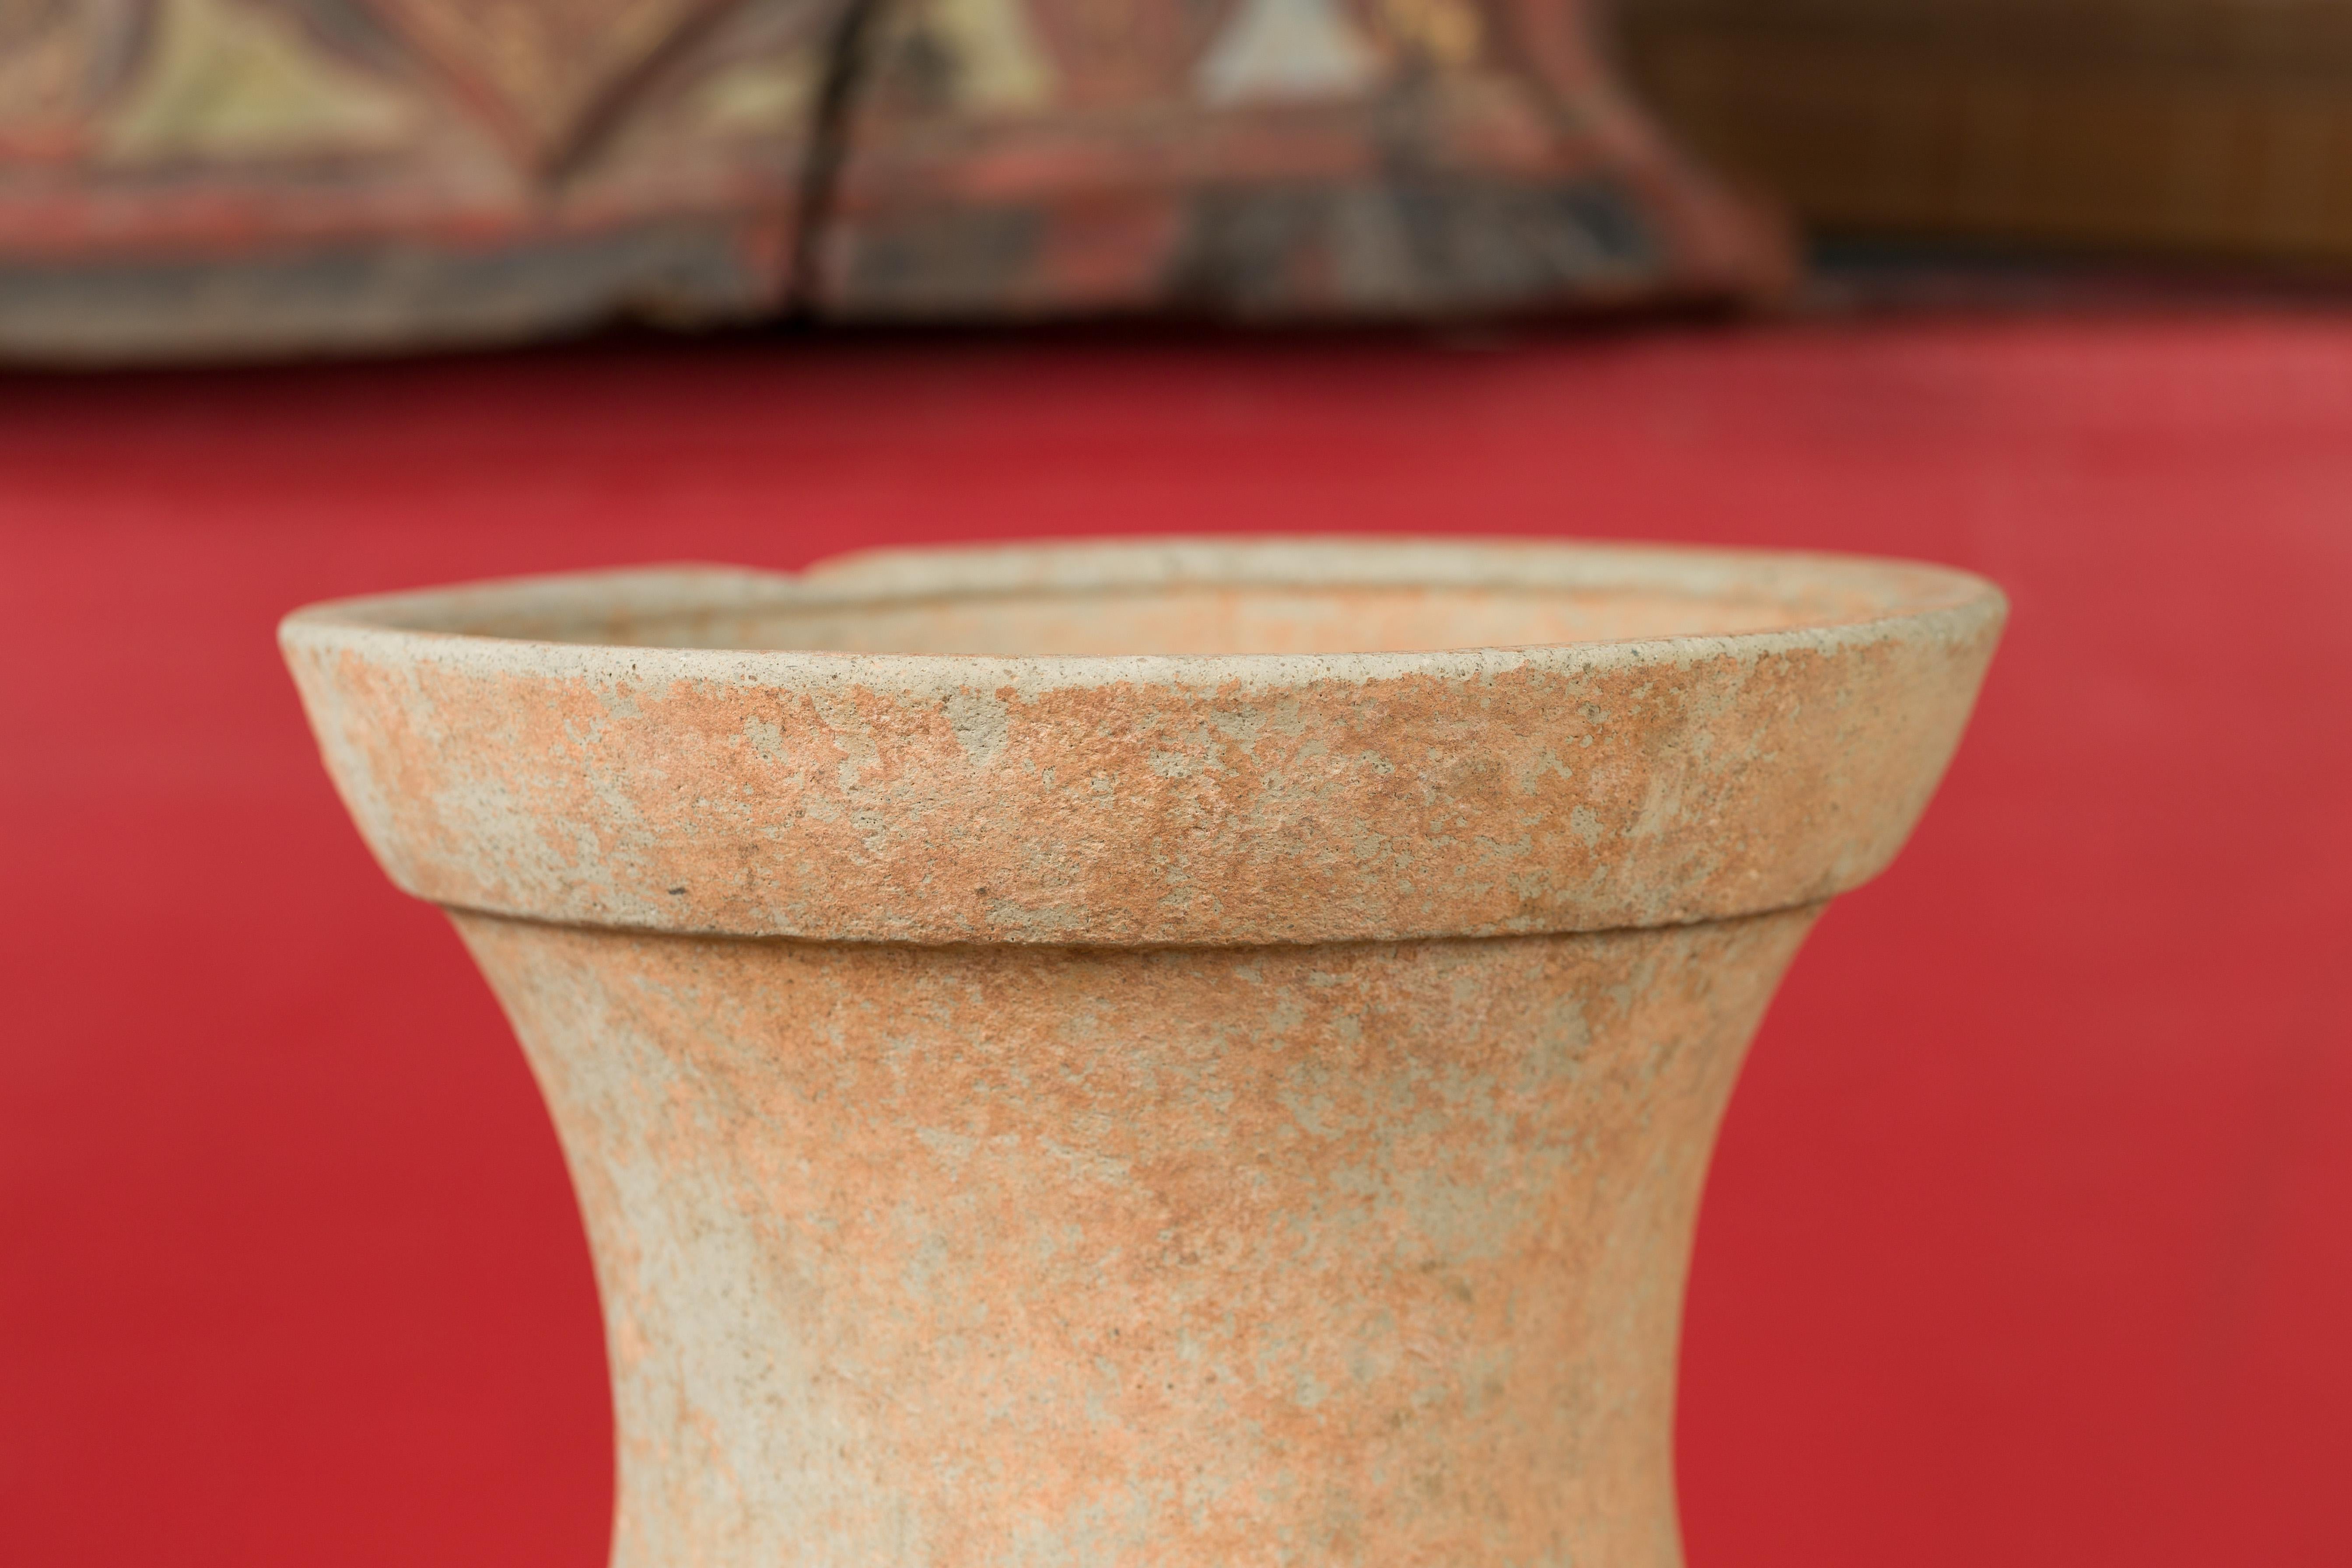 18th Century and Earlier Chinese Han Dynasty Period Unglazed Terracotta Hu Vessel, circa 202 BC-200 AD